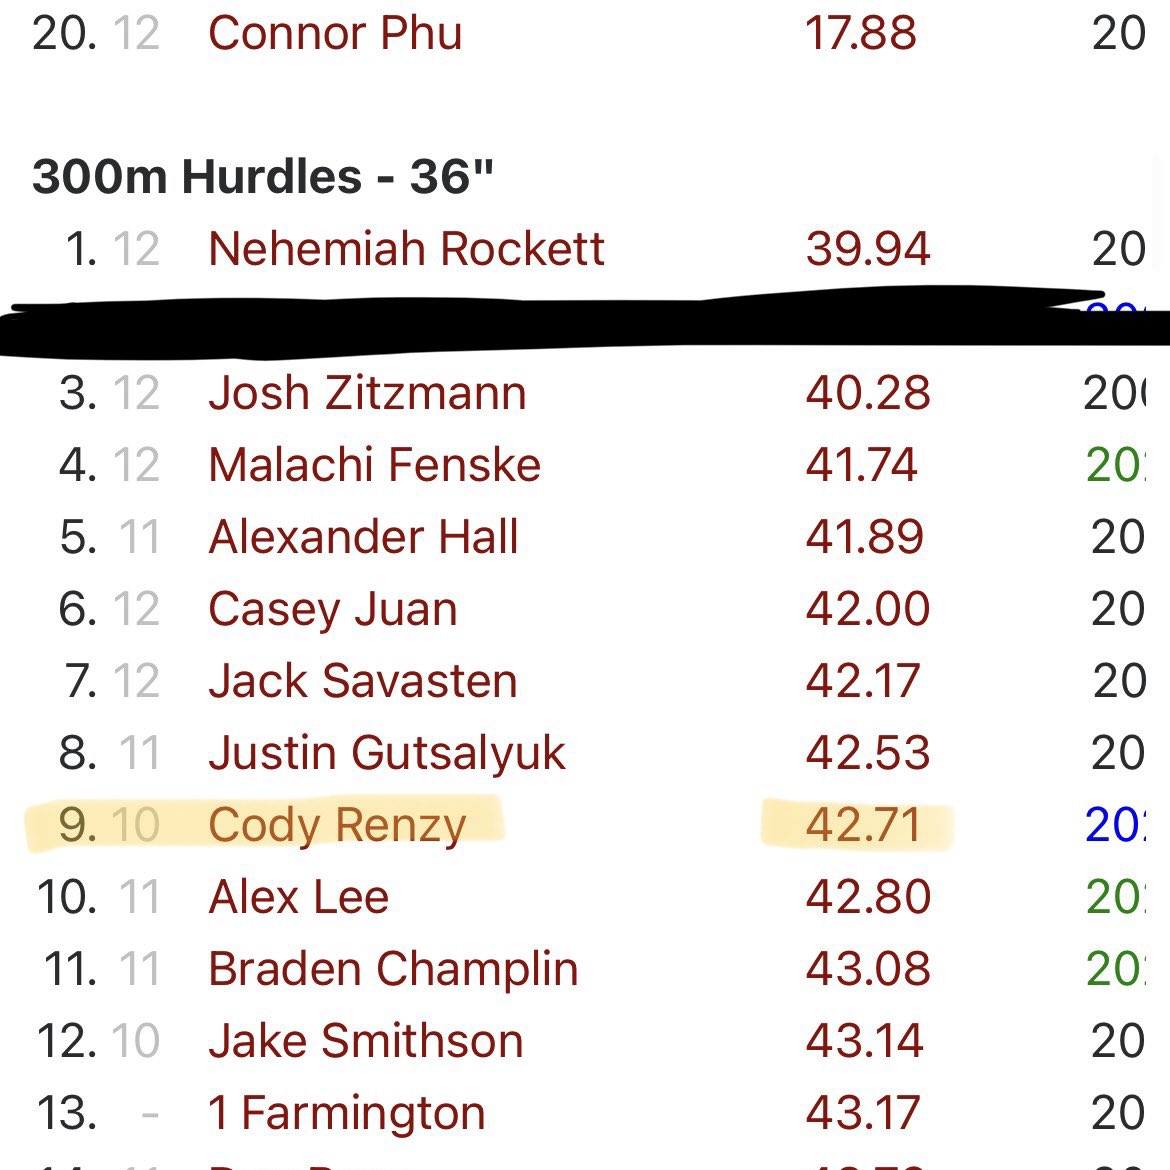 Grateful to have the 6th & 8th fastest times on the 110m hurdles & 300m hurdles , in Farmington recorded history! Wouldn’t have been possible without @JoeBullis